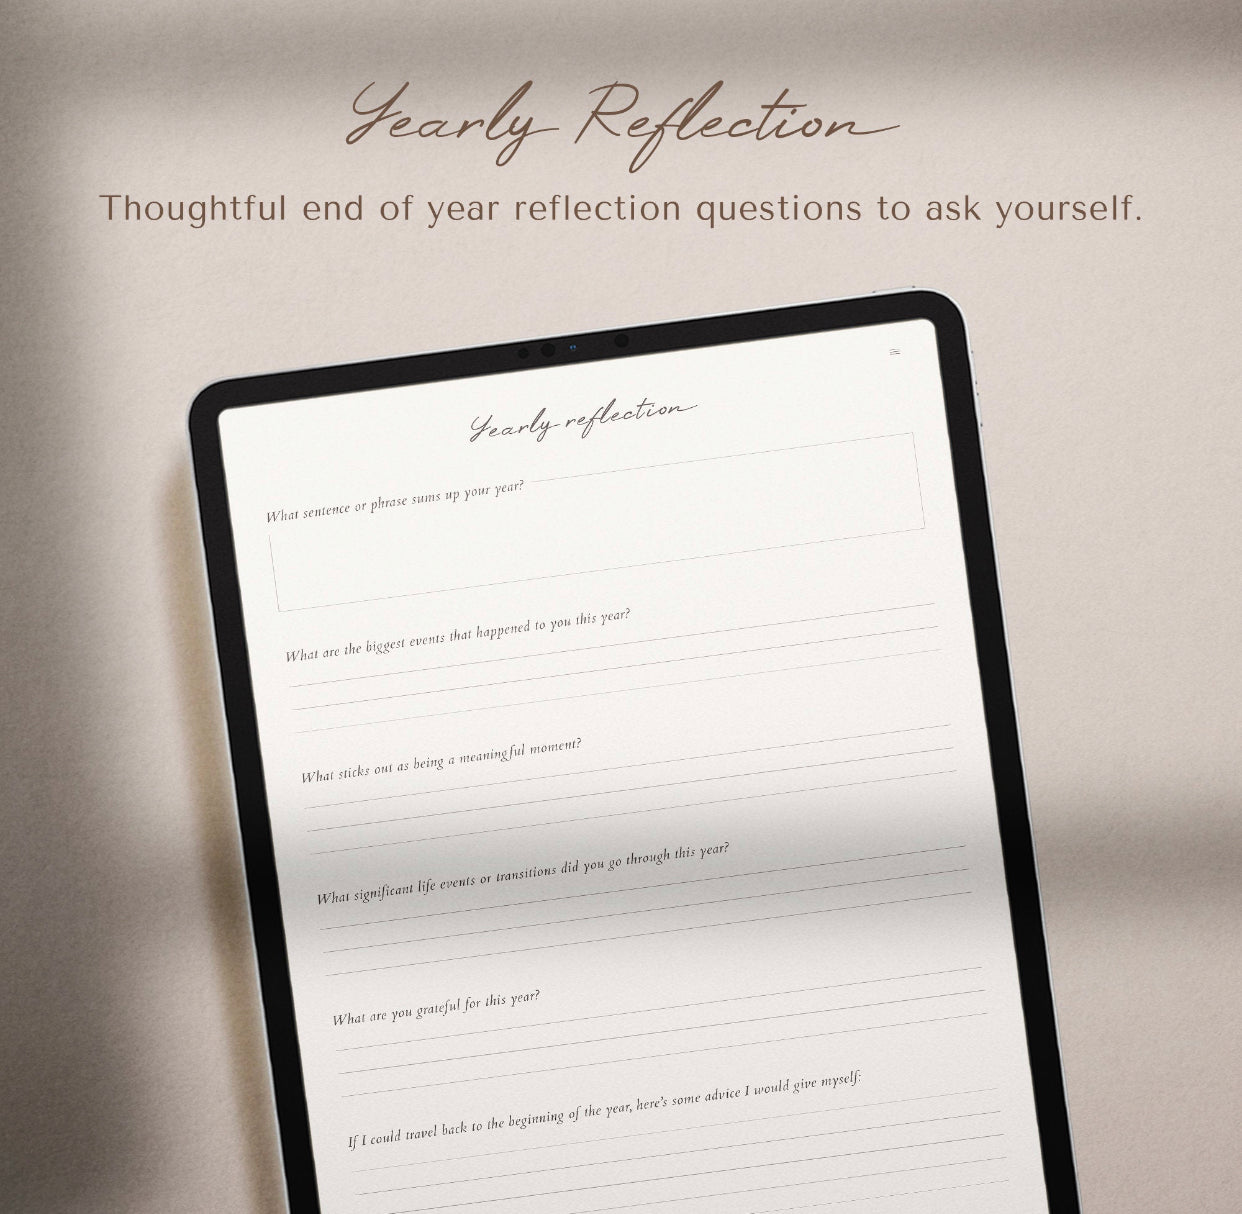 Goodnotes Digital Day and Night Daily Gratitude Journal, 393 pages